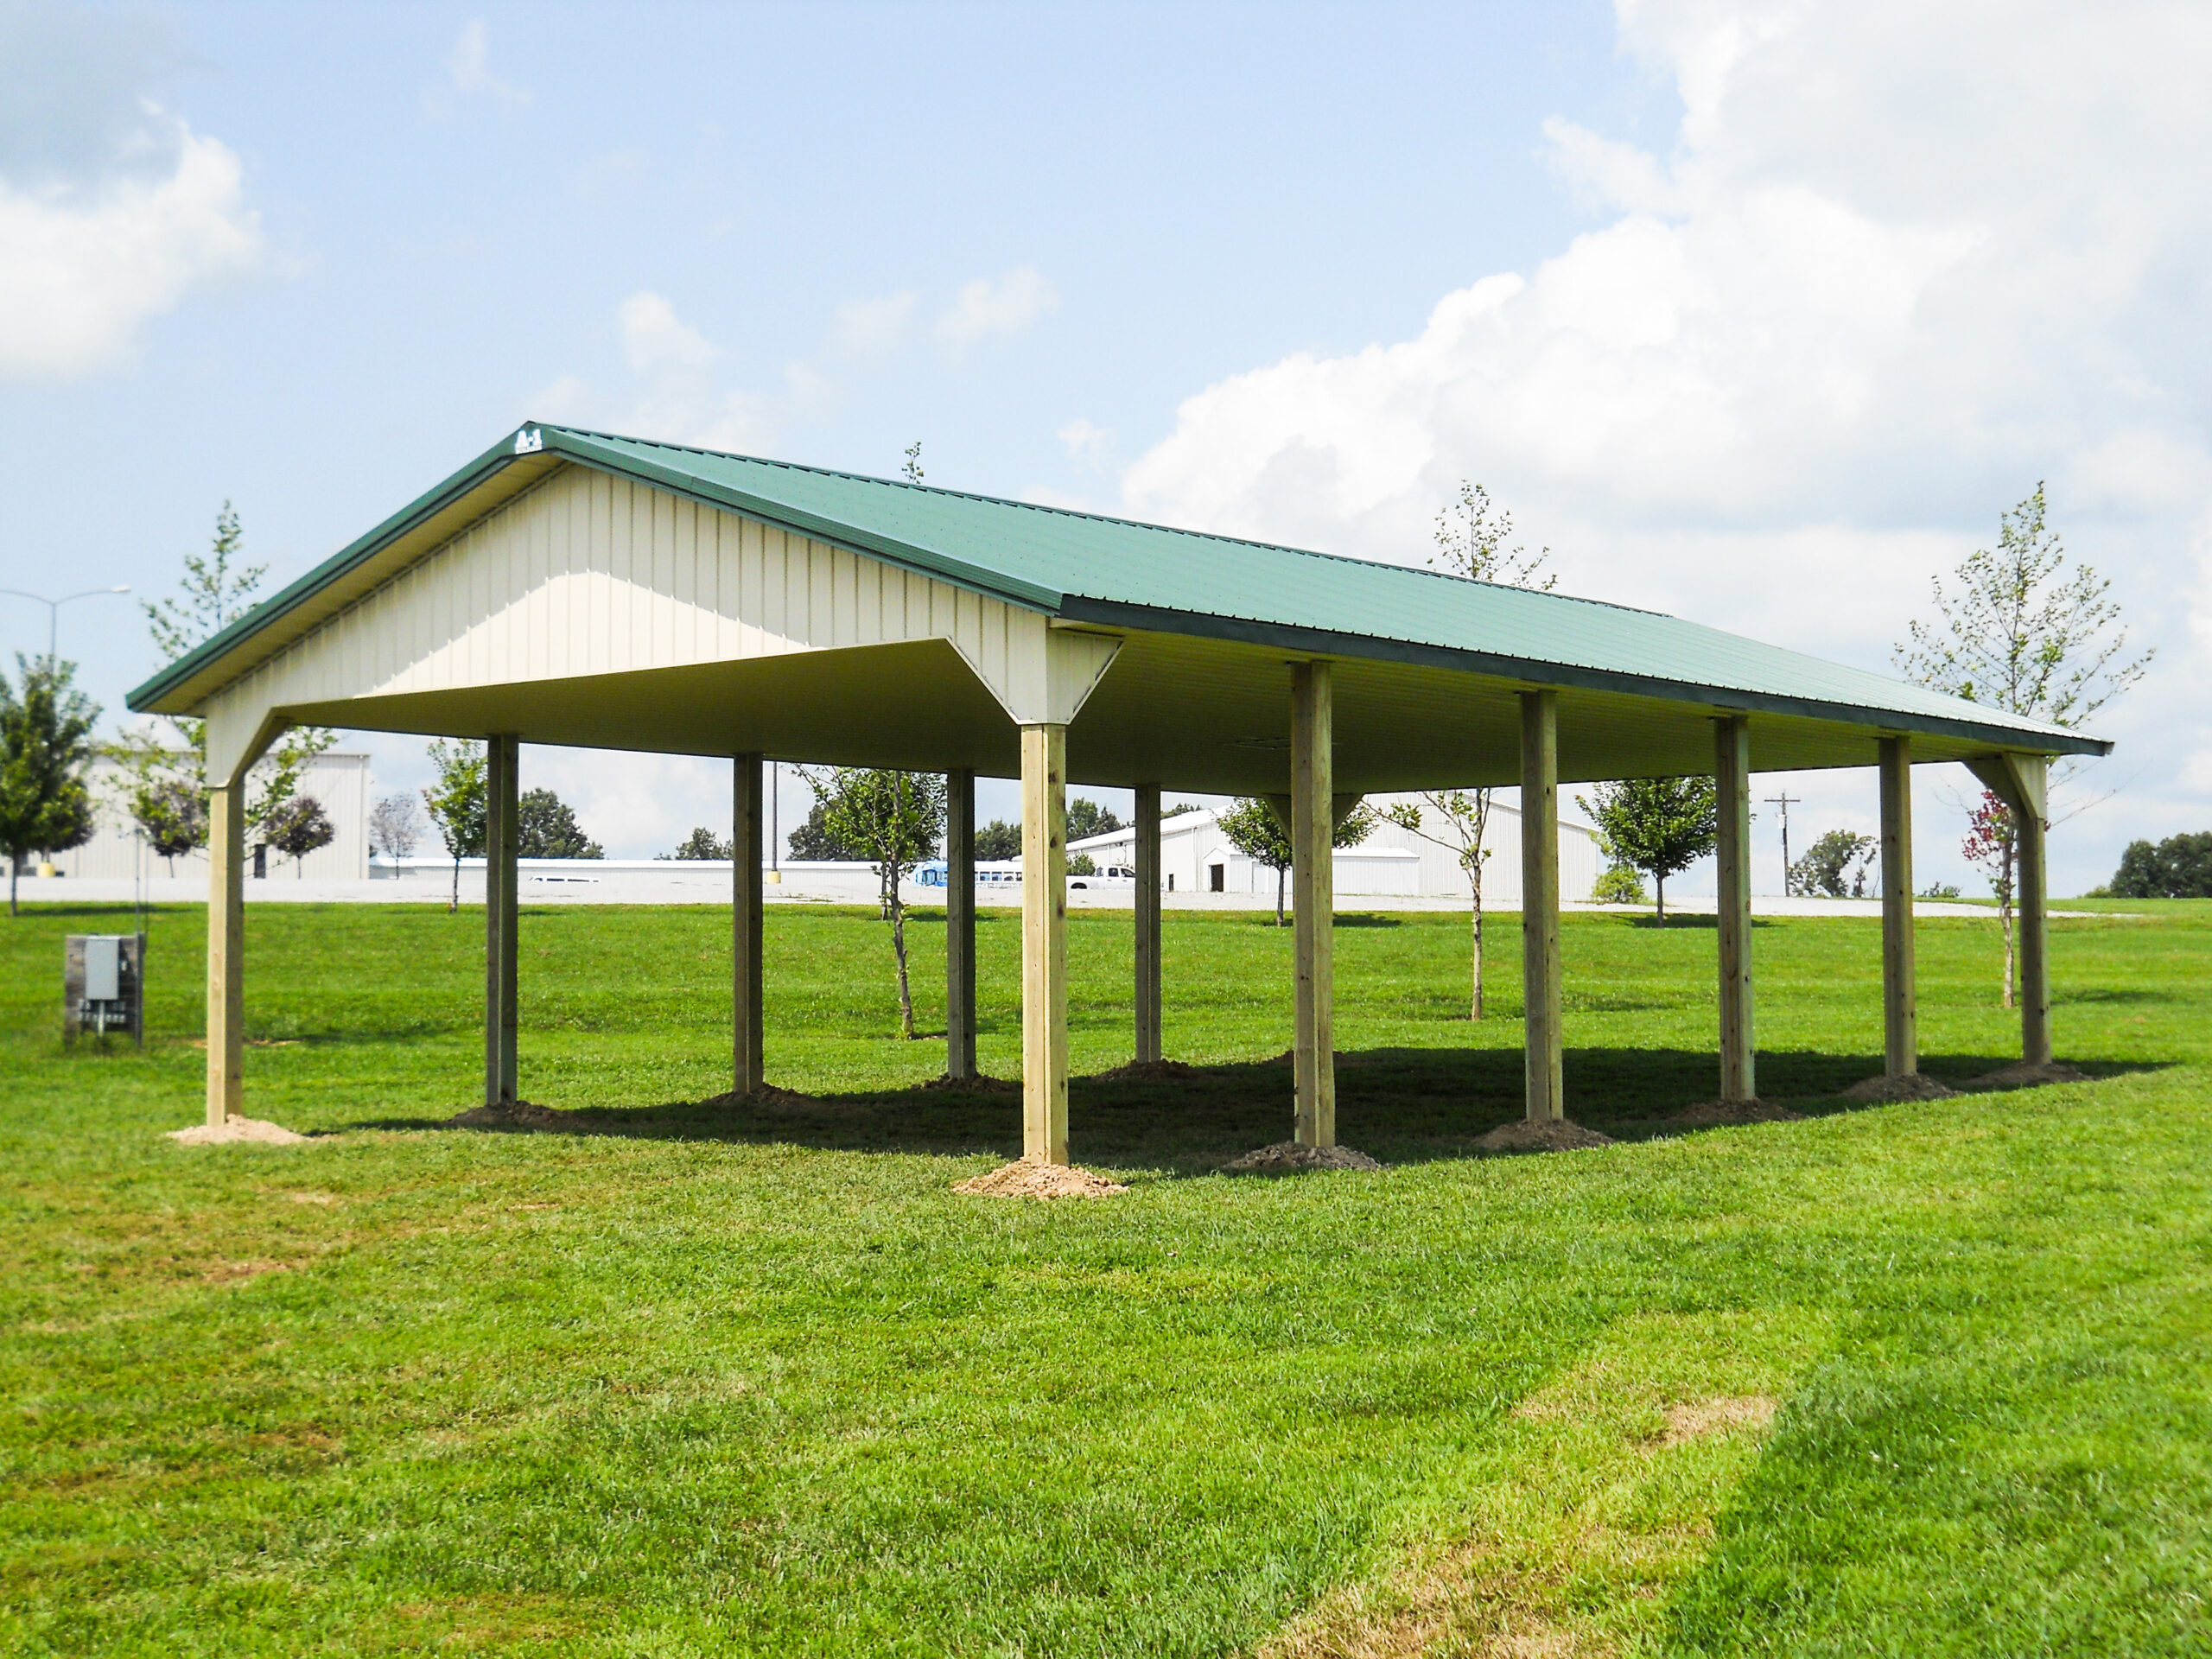 Green roof, tan pavillion structure with posts in Marion, Illinois